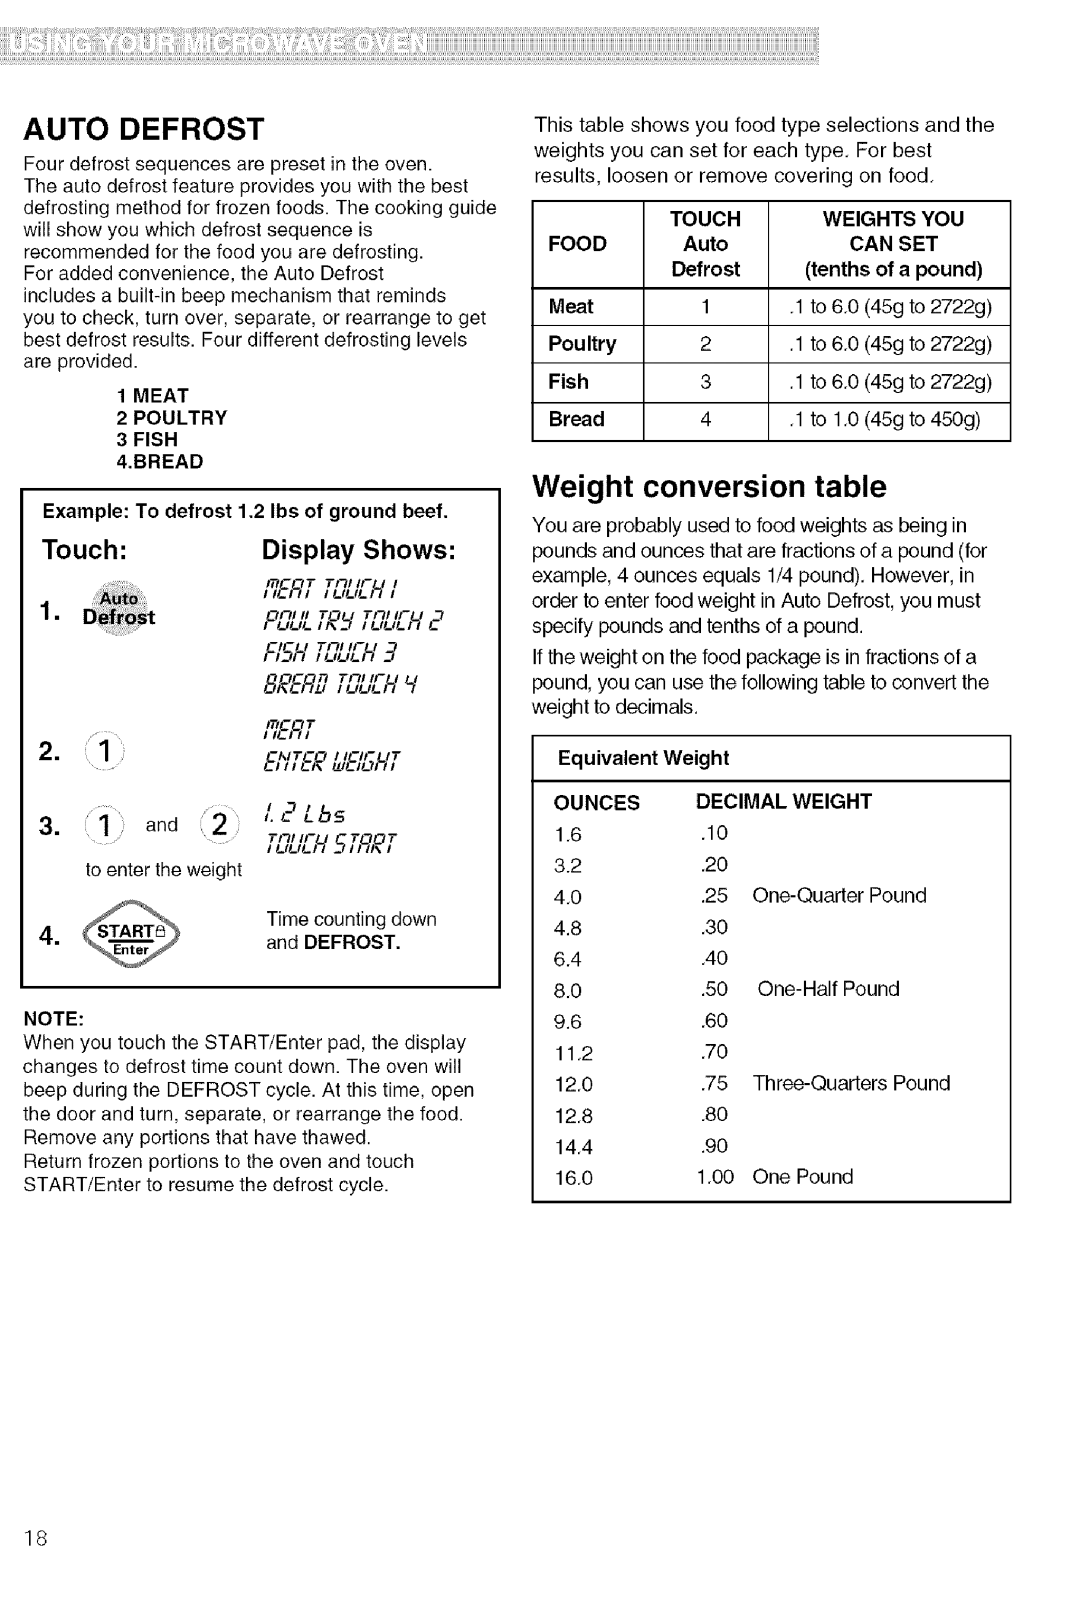 Kenmore 721.80609 Weight conversion table, Auto Defrost, i and 2 ?Lbs, Display Shows, qTTn, £LG,£7L?L/L-3H, 5,iS, Touch 